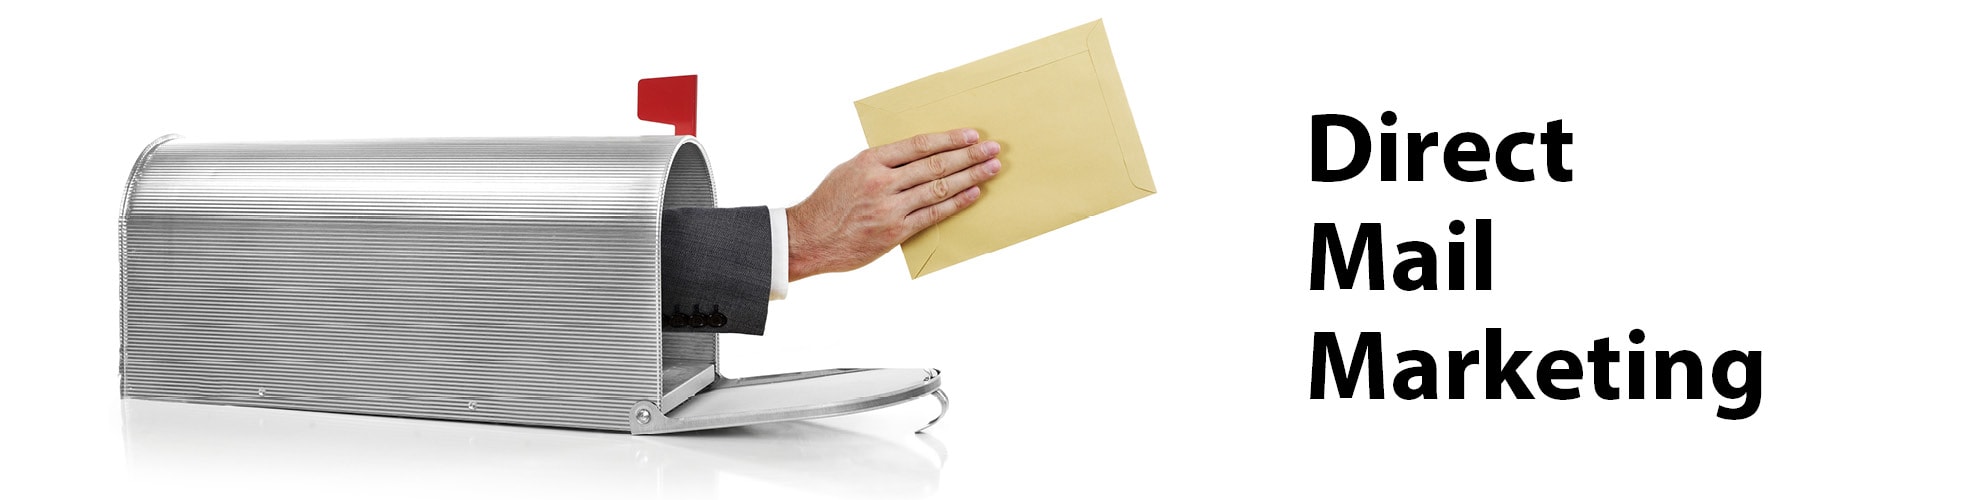 direct mail marketing | LMS Solutions